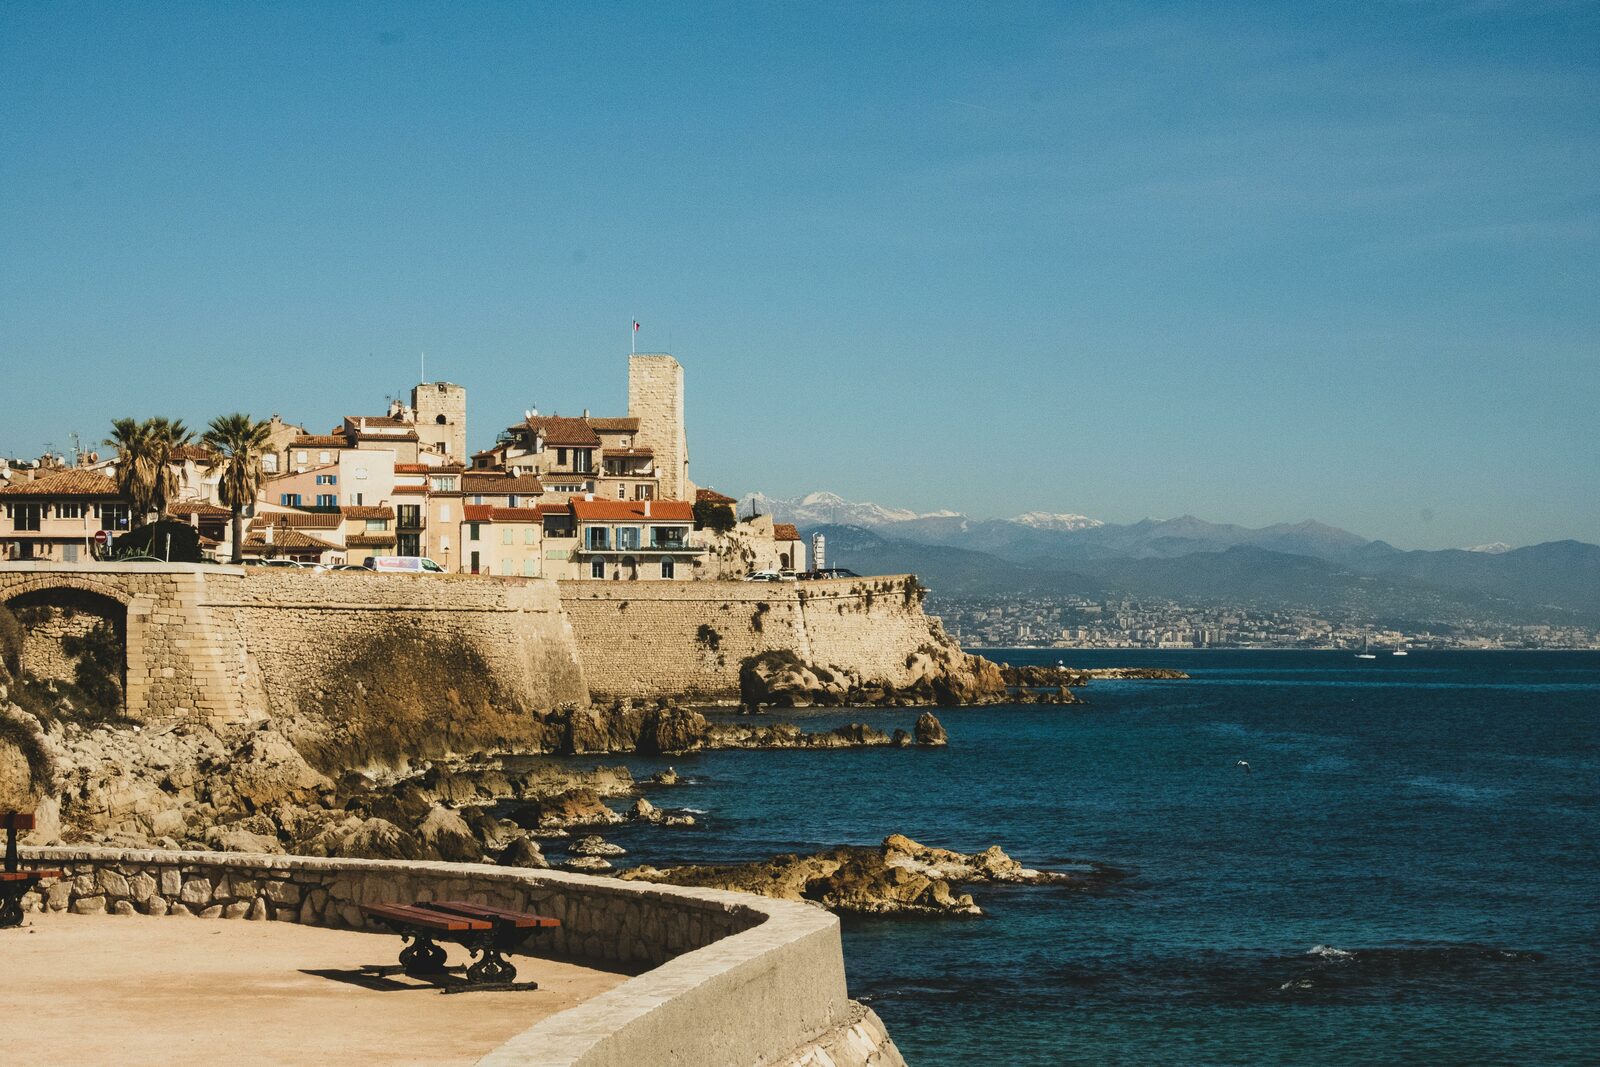 View of the city of Antibes on the French Riviera